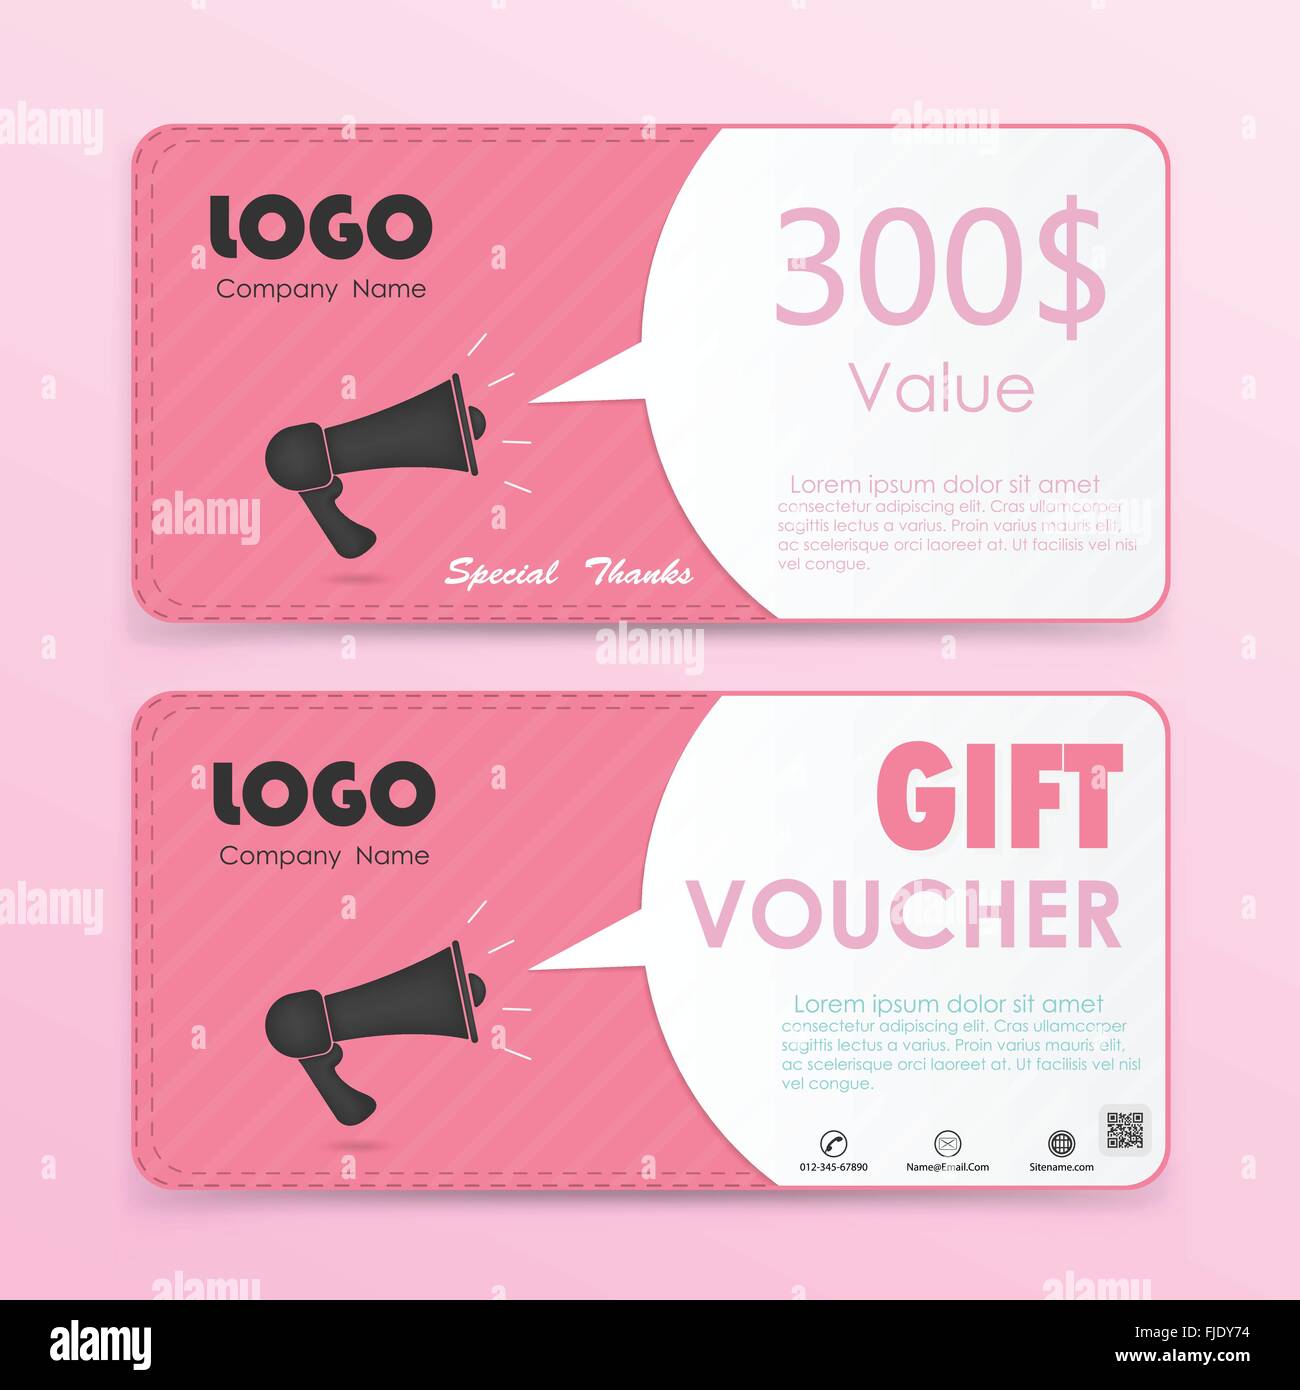 Premium Vector  Gift voucher template isolated on gray background